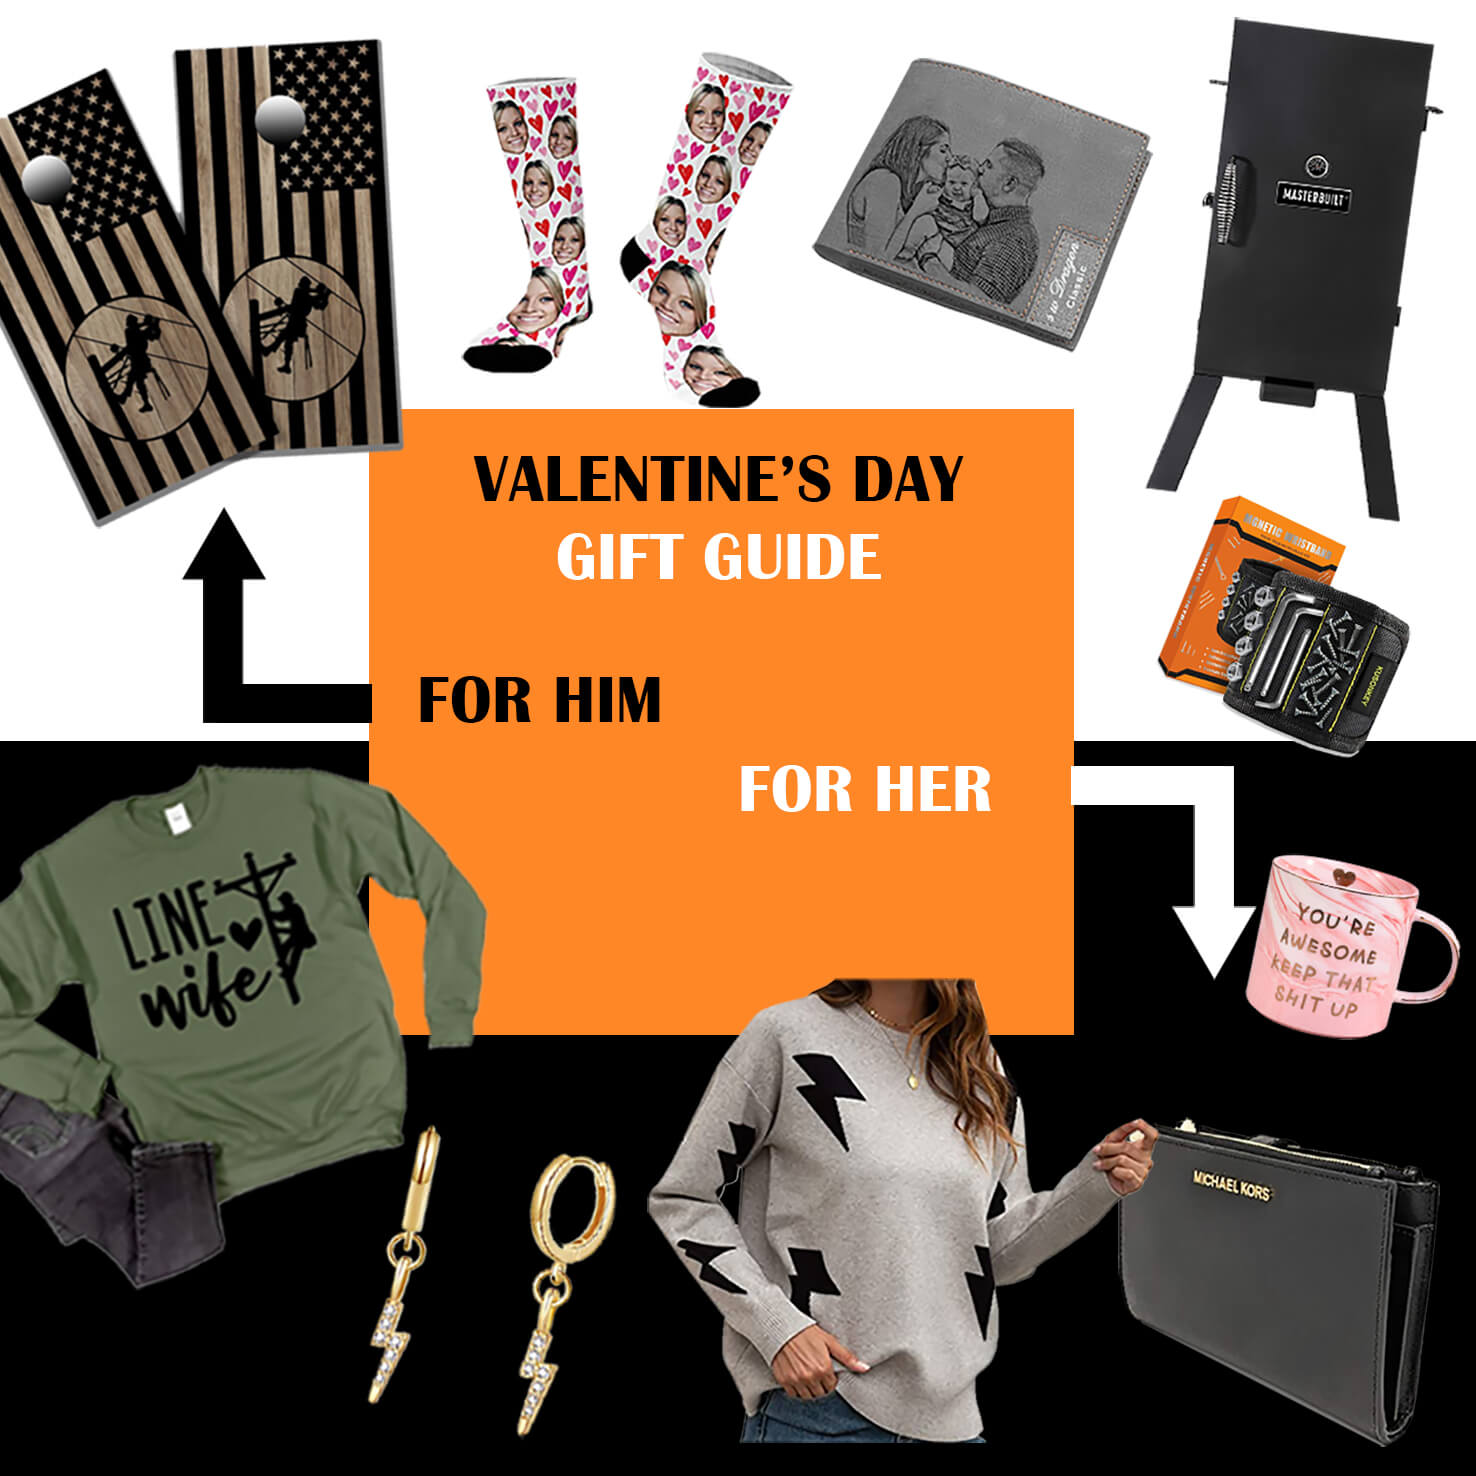 Lineman And Linewife Gift Guide - Valentine's Day Edition